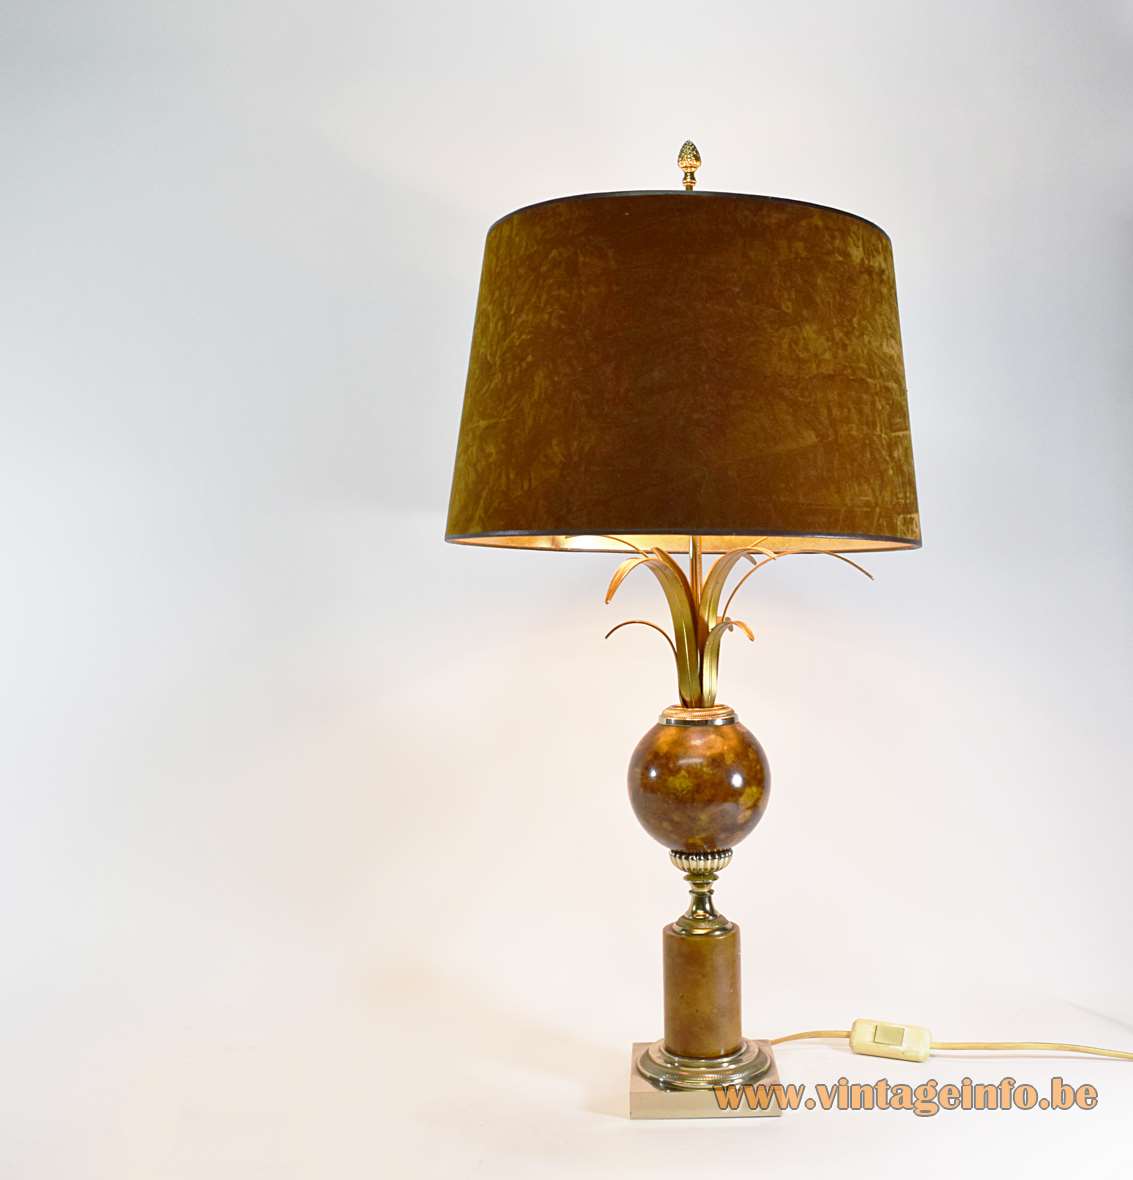 Marble & reed table lamp square base stone globe brass palm leaves velours lampshade 1970s Boulanger Belgium